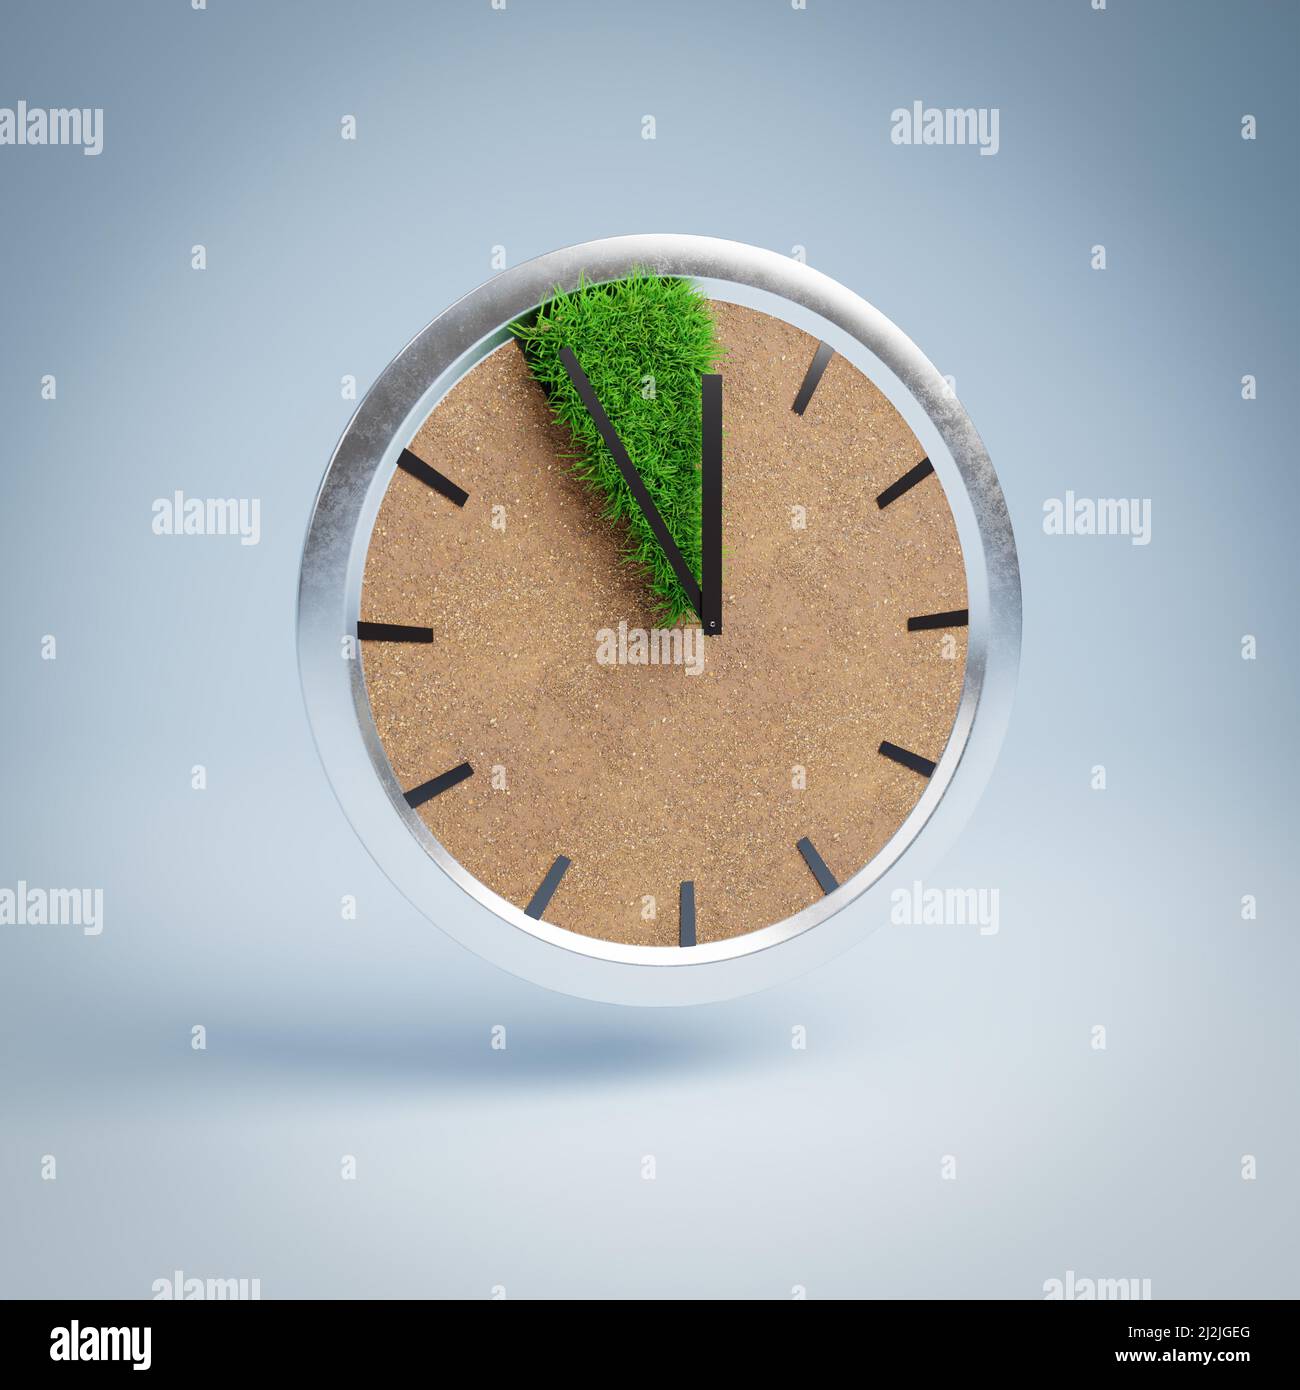 Time is running out for acting against the climate crisis. It is 5 minutes to twelve. Concept shot showing a clock with arid soil and a small patch of Stock Photo